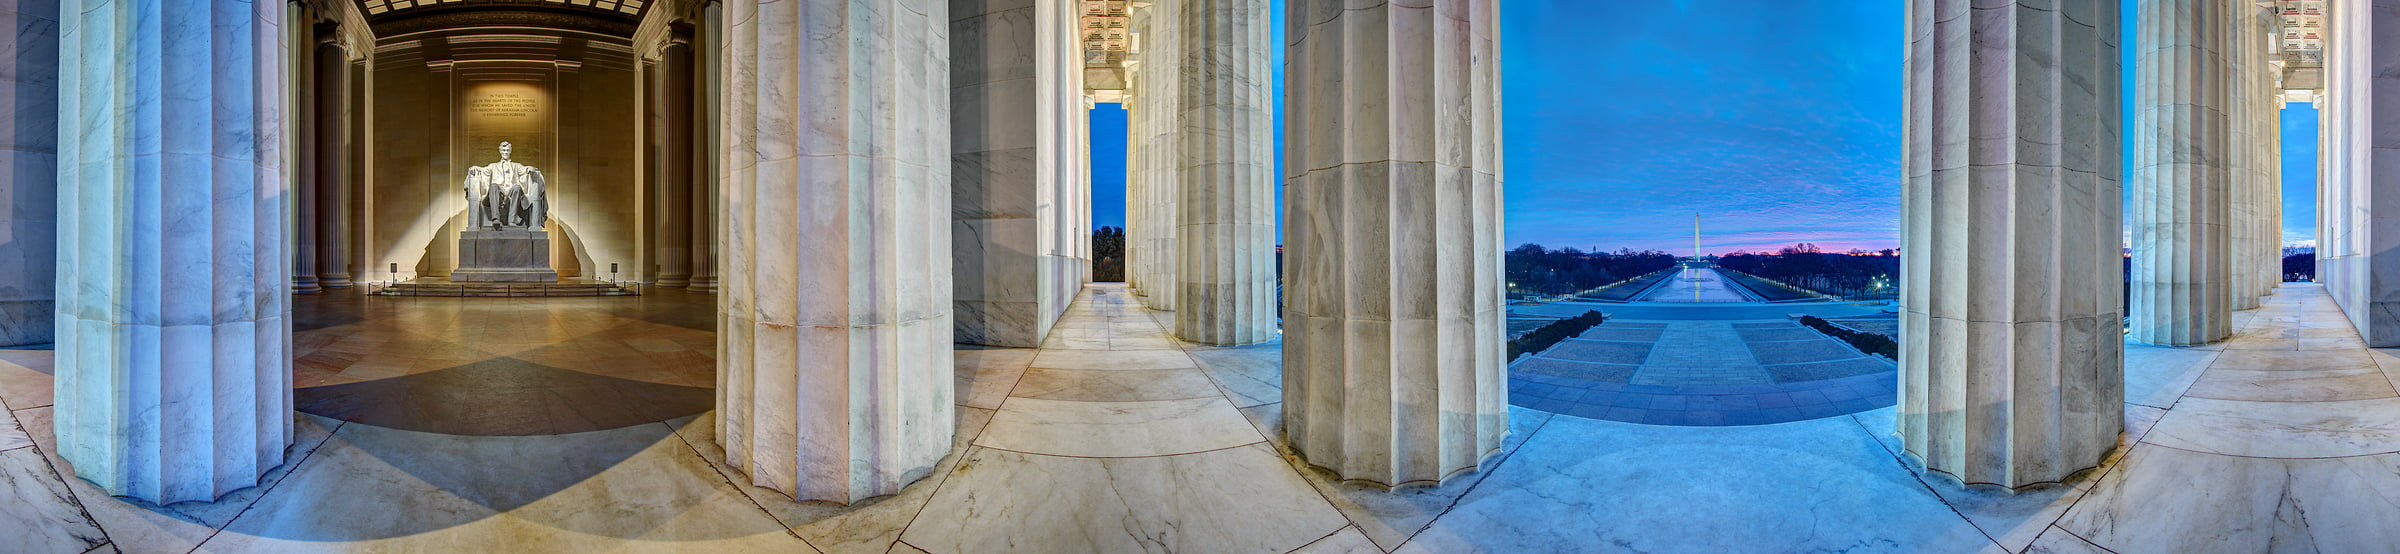 220 megapixels! A very high resolution, 360-degree VAST photo of the Lincoln Memorial and the National Mall at twilight; panorama photograph created by Tim Lo Monaco in Washington, D.C.